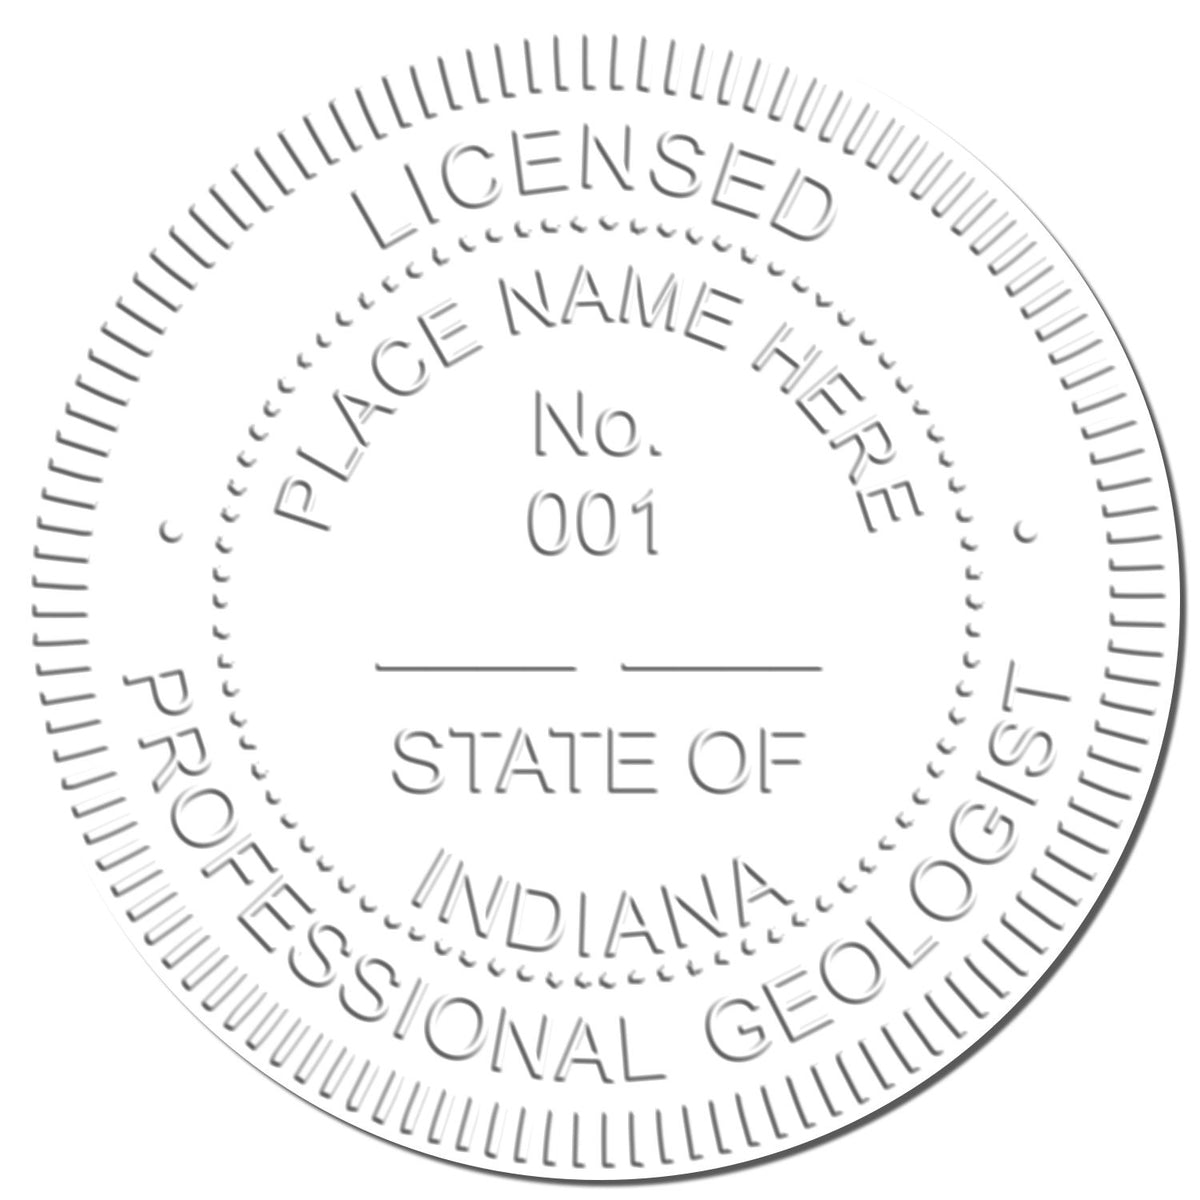 A photograph of the State of Indiana Extended Long Reach Geologist Seal stamp impression reveals a vivid, professional image of the on paper.